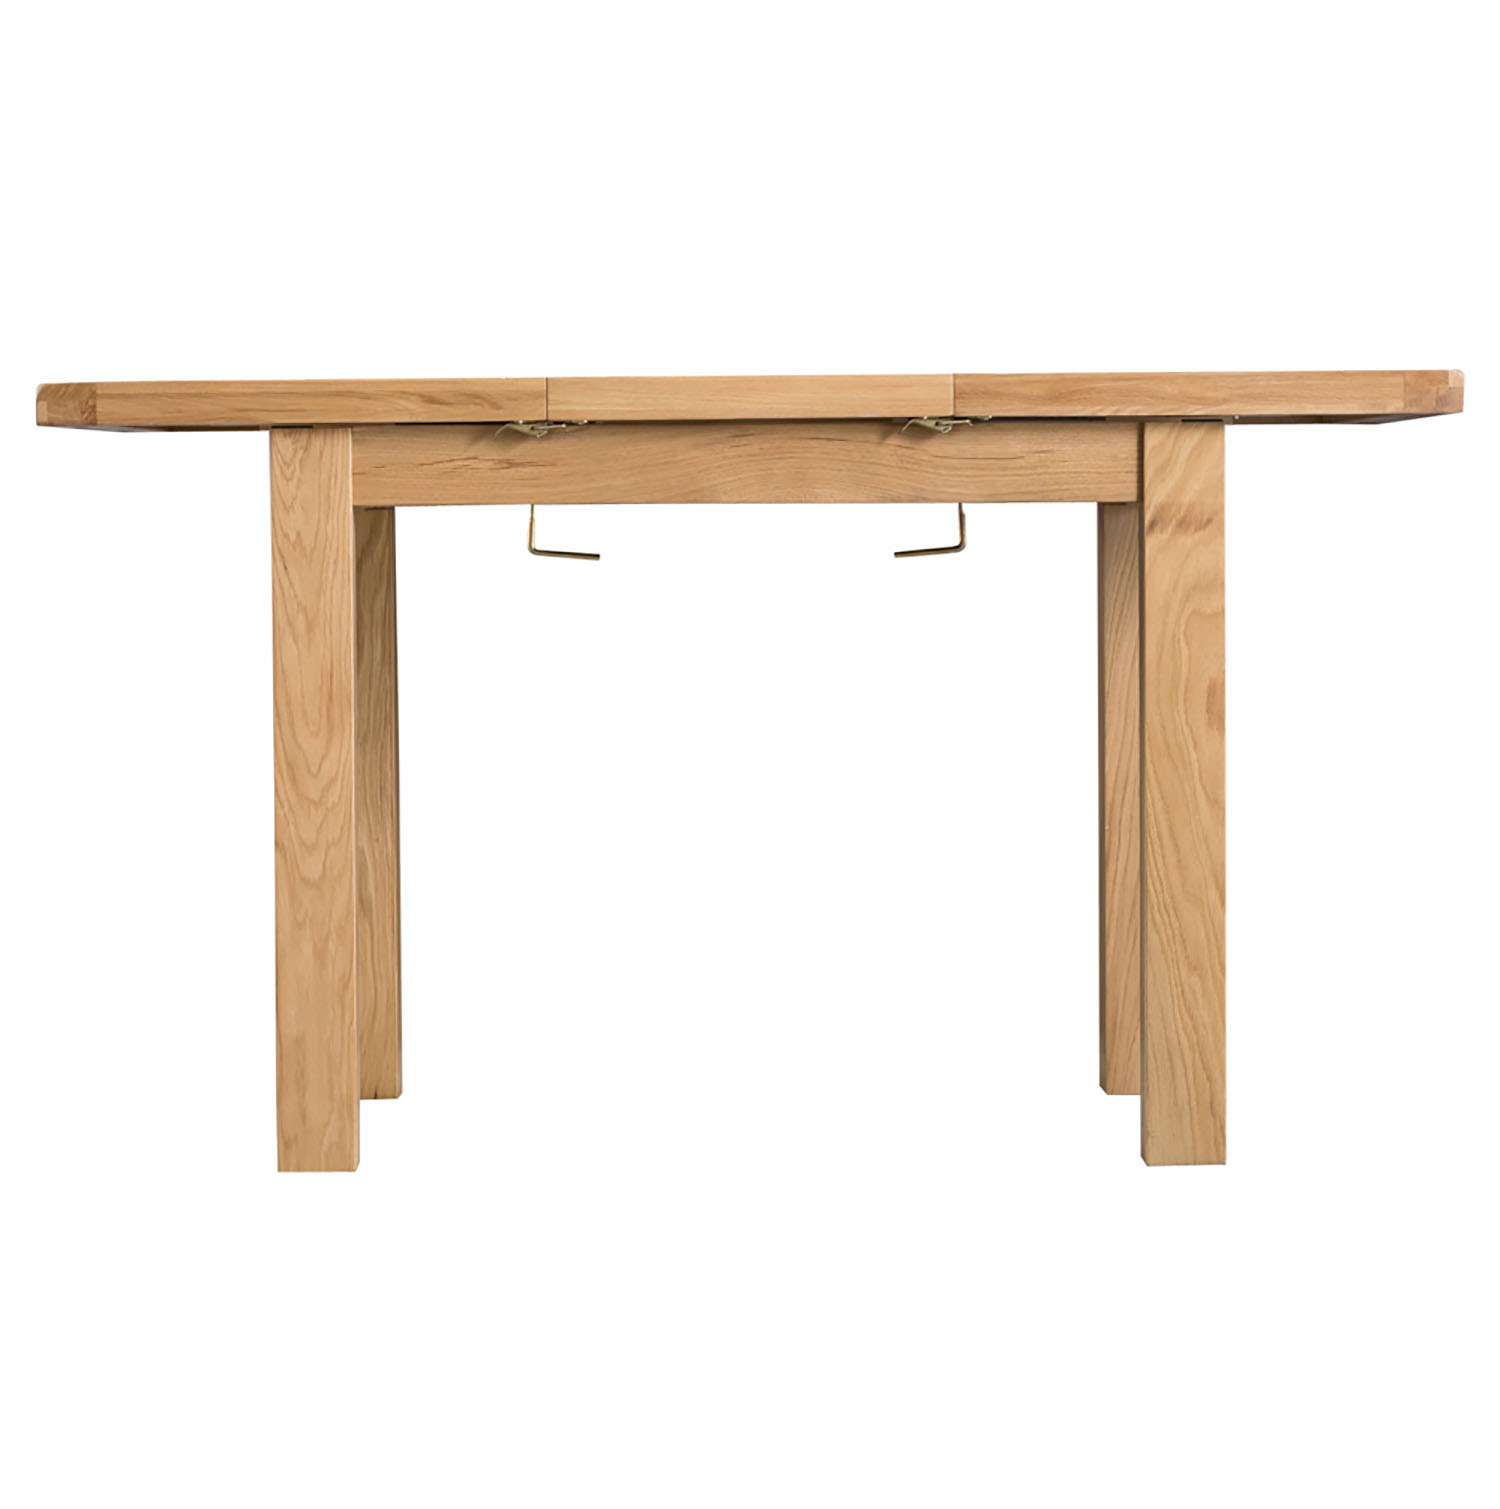 Oakley Rustic 100-140cm Butterfly Ext Dining Table